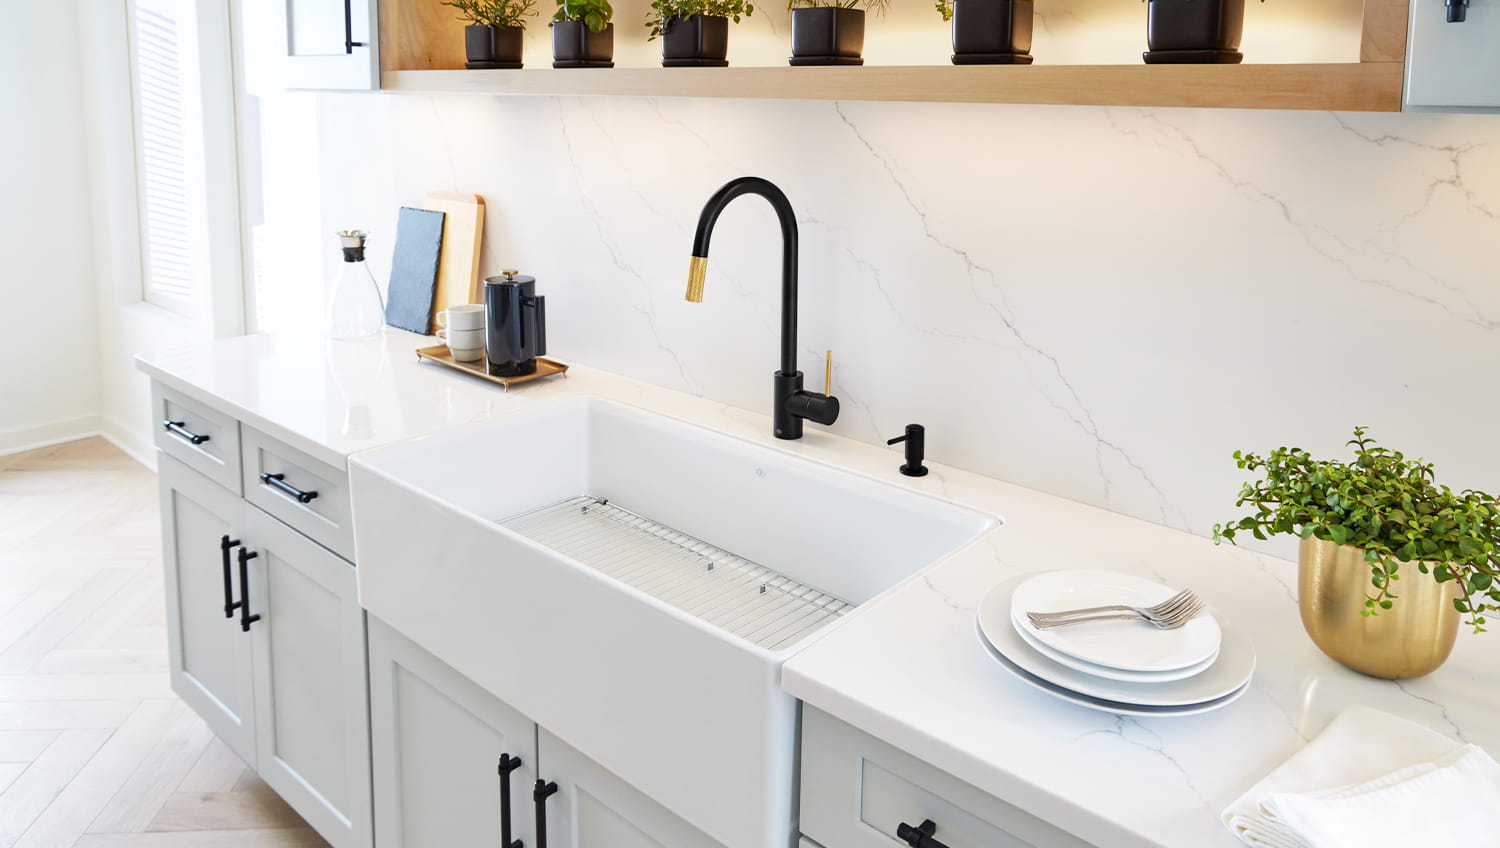 Etre Modern Kitchen Faucets From DXV